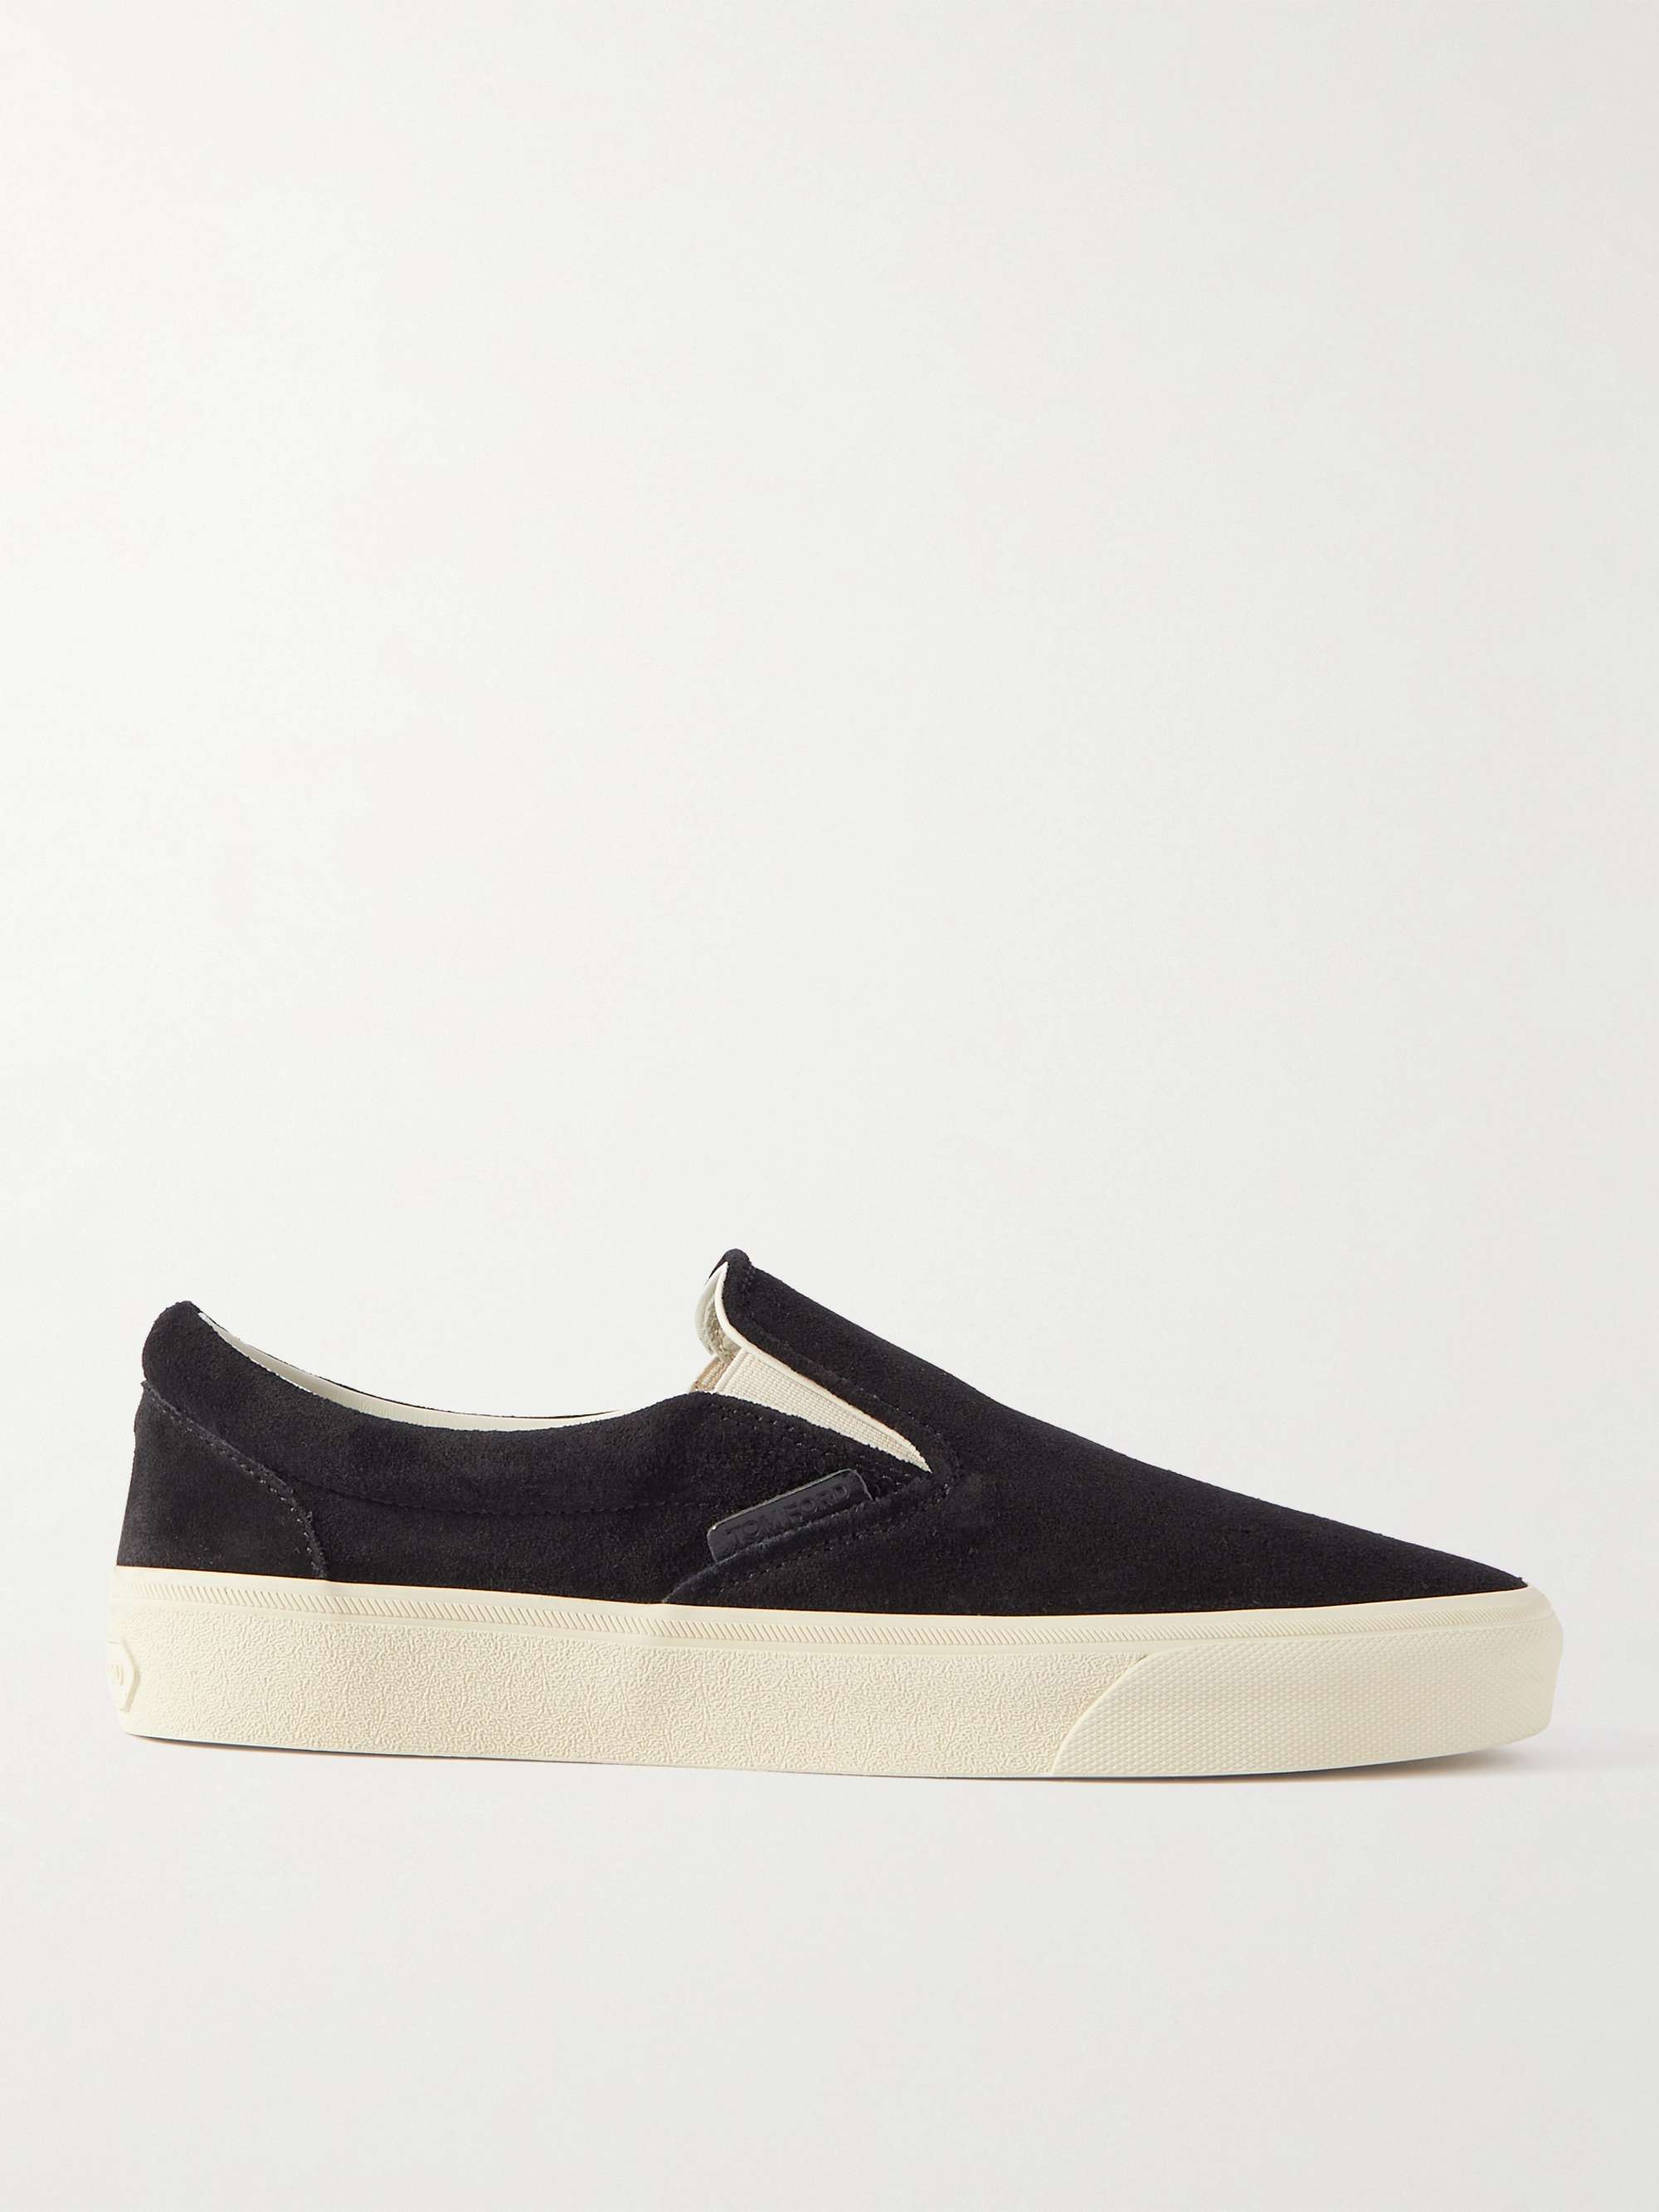 Fun Sailor Studded Leather and Suede Slip-On Sneakers